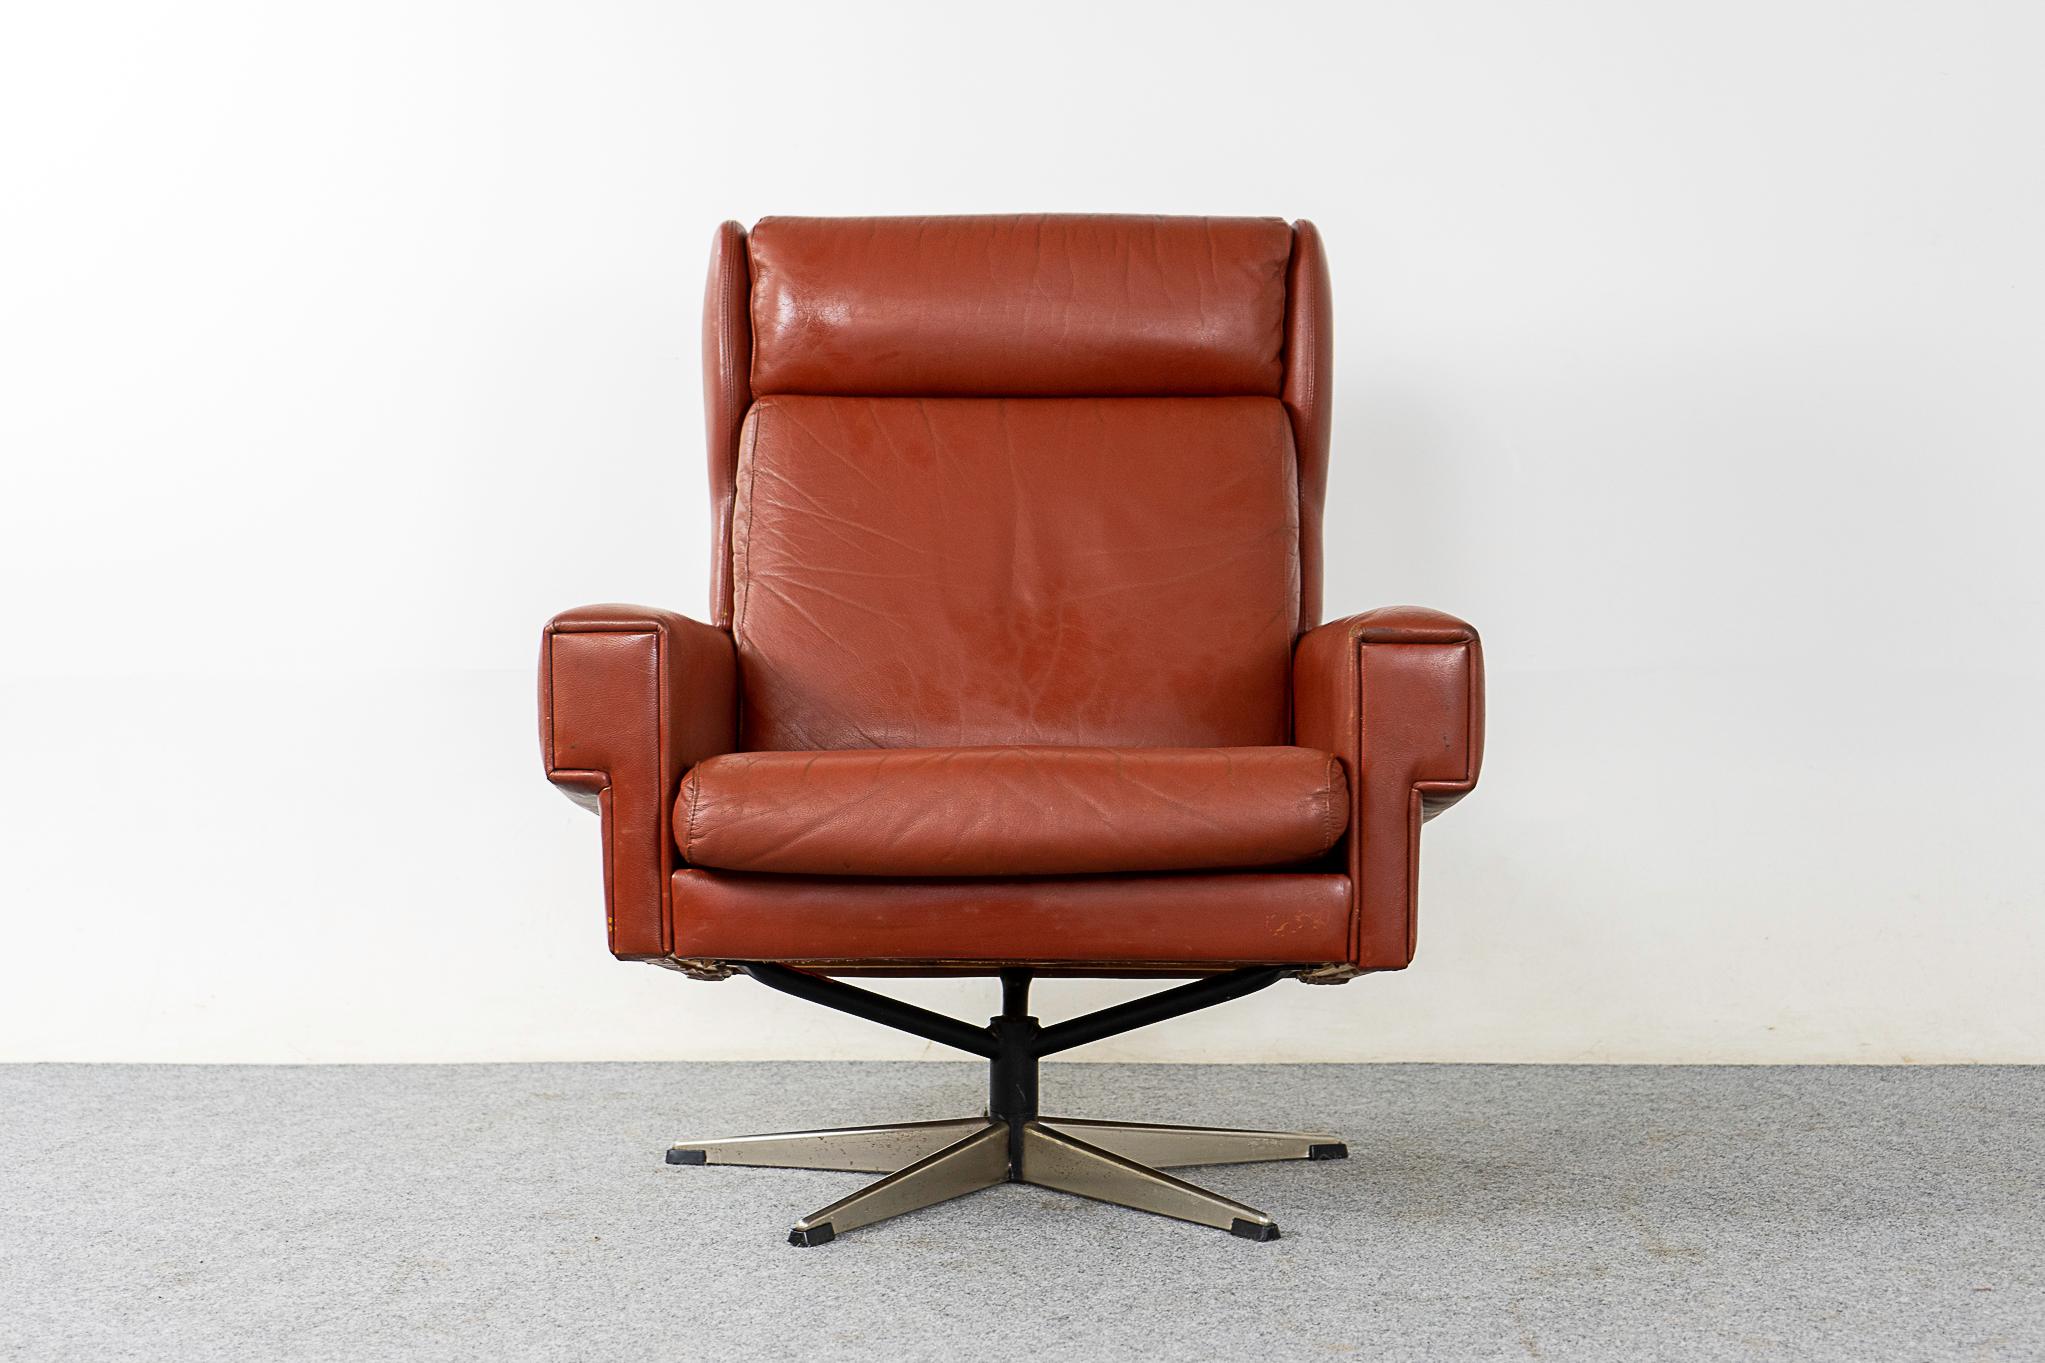 Leather Danish swivel chair, circa 1960's. High back provides excellent neck support. Beautiful deep rust tone leather in great vintage condition. Robust metal base with original feet.

Please inquire for remote and international shipping rates.